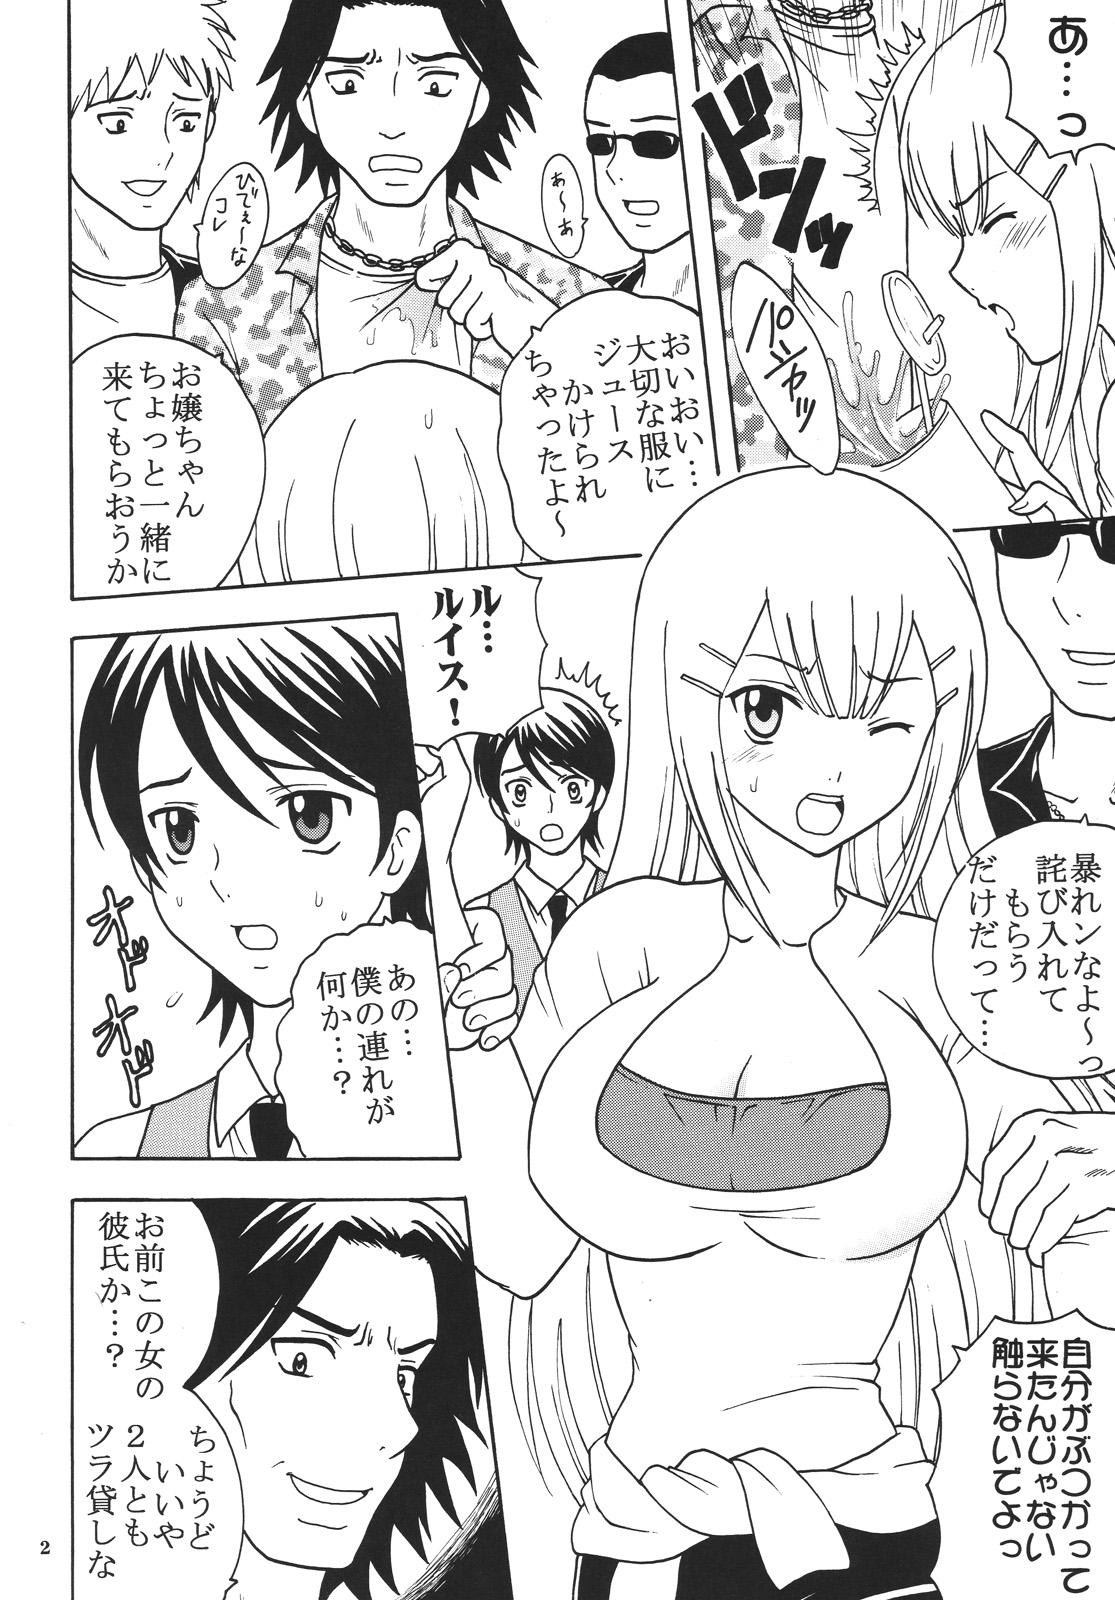 Passion COSMIC BREED 00 - Gundam 00 Jerking Off - Page 3